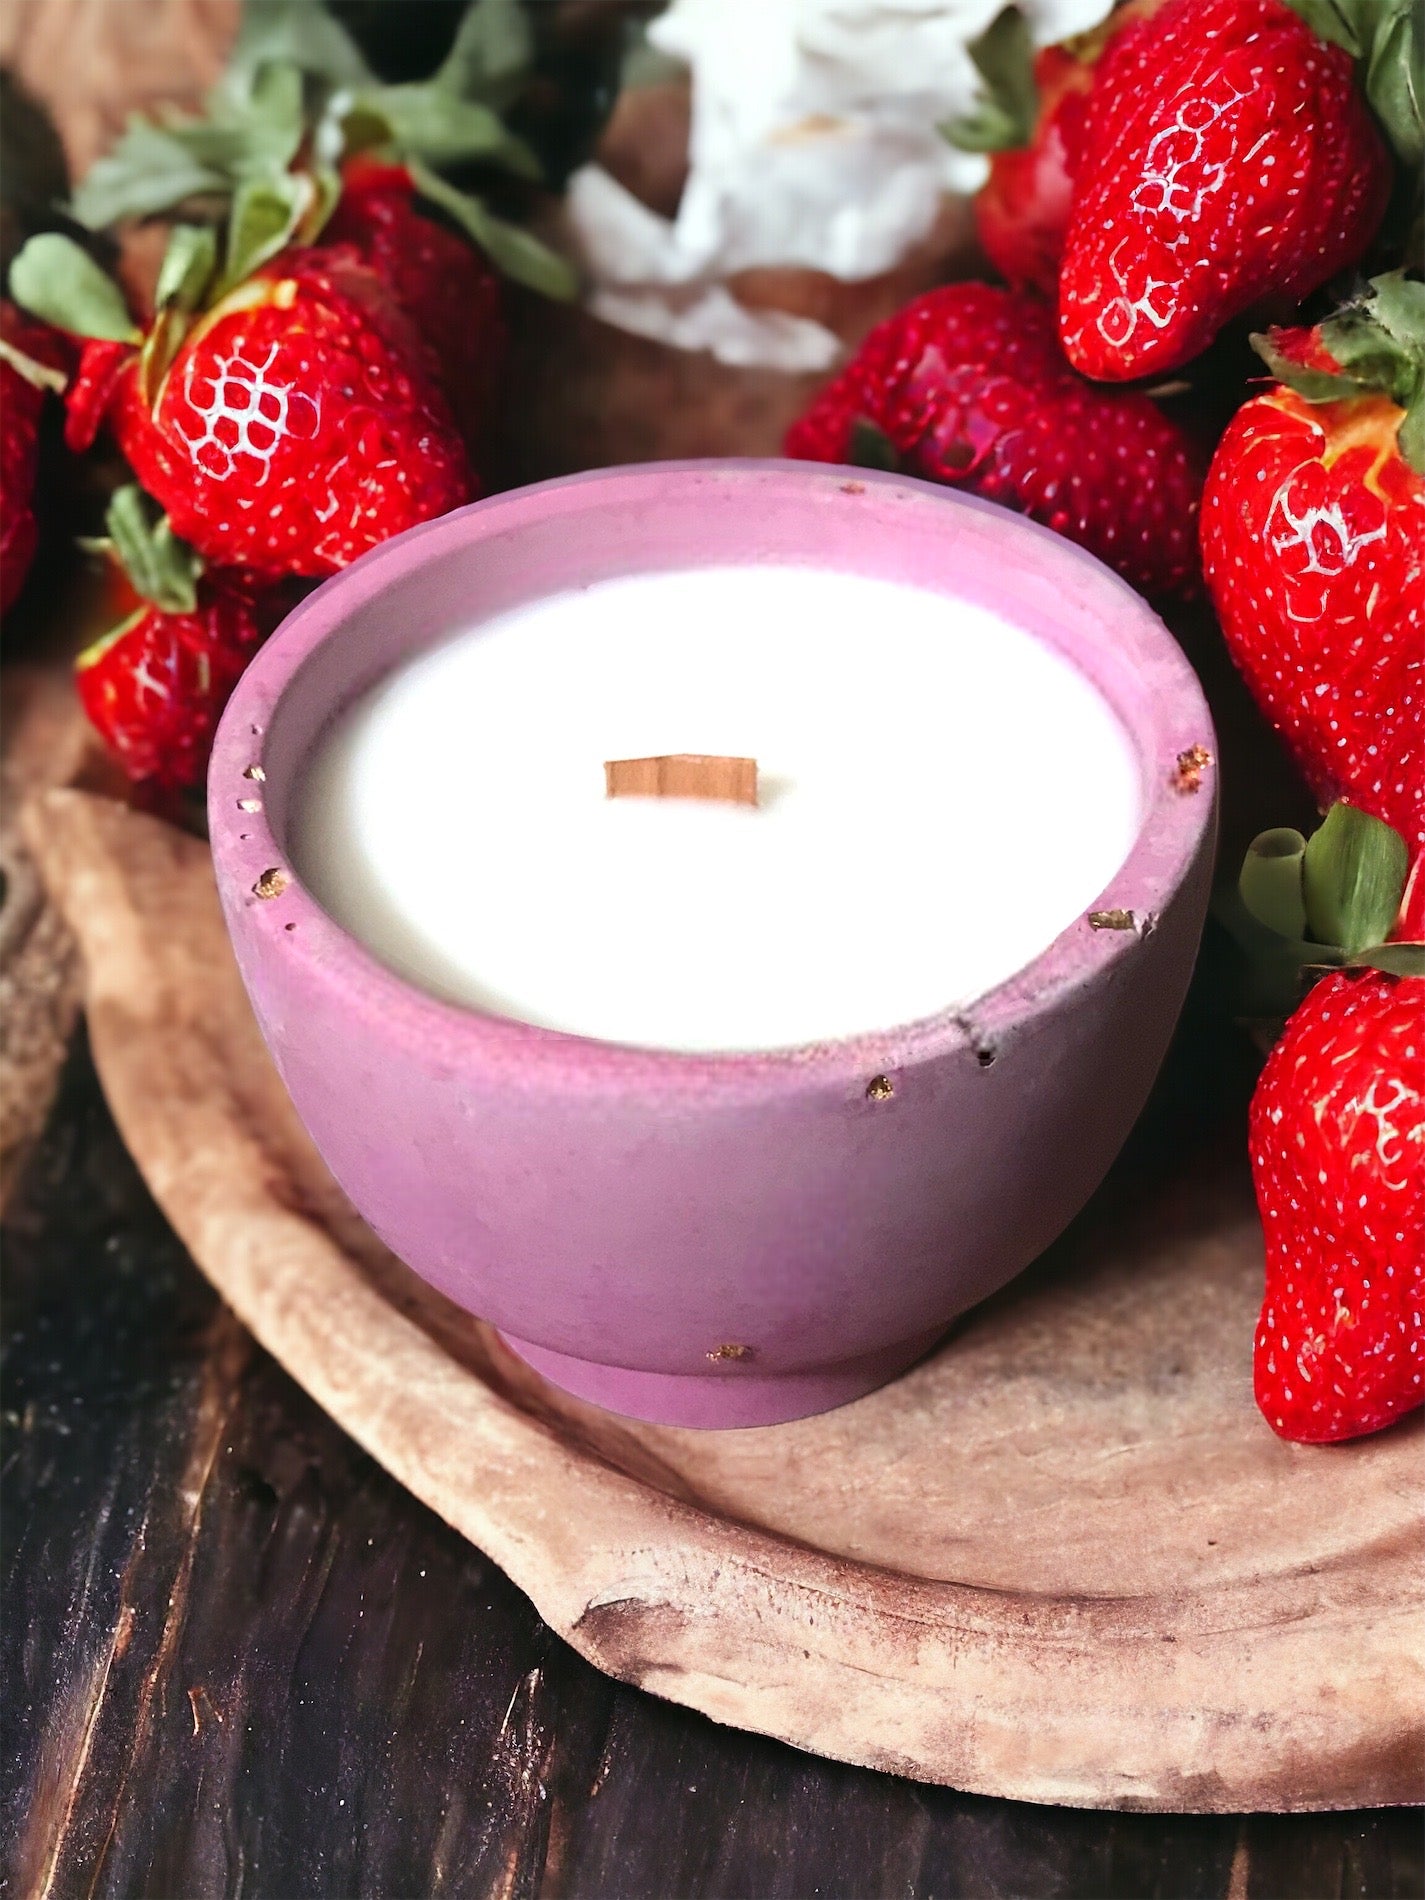 "Strawberry Fields Forever" Scented Concrete Candle